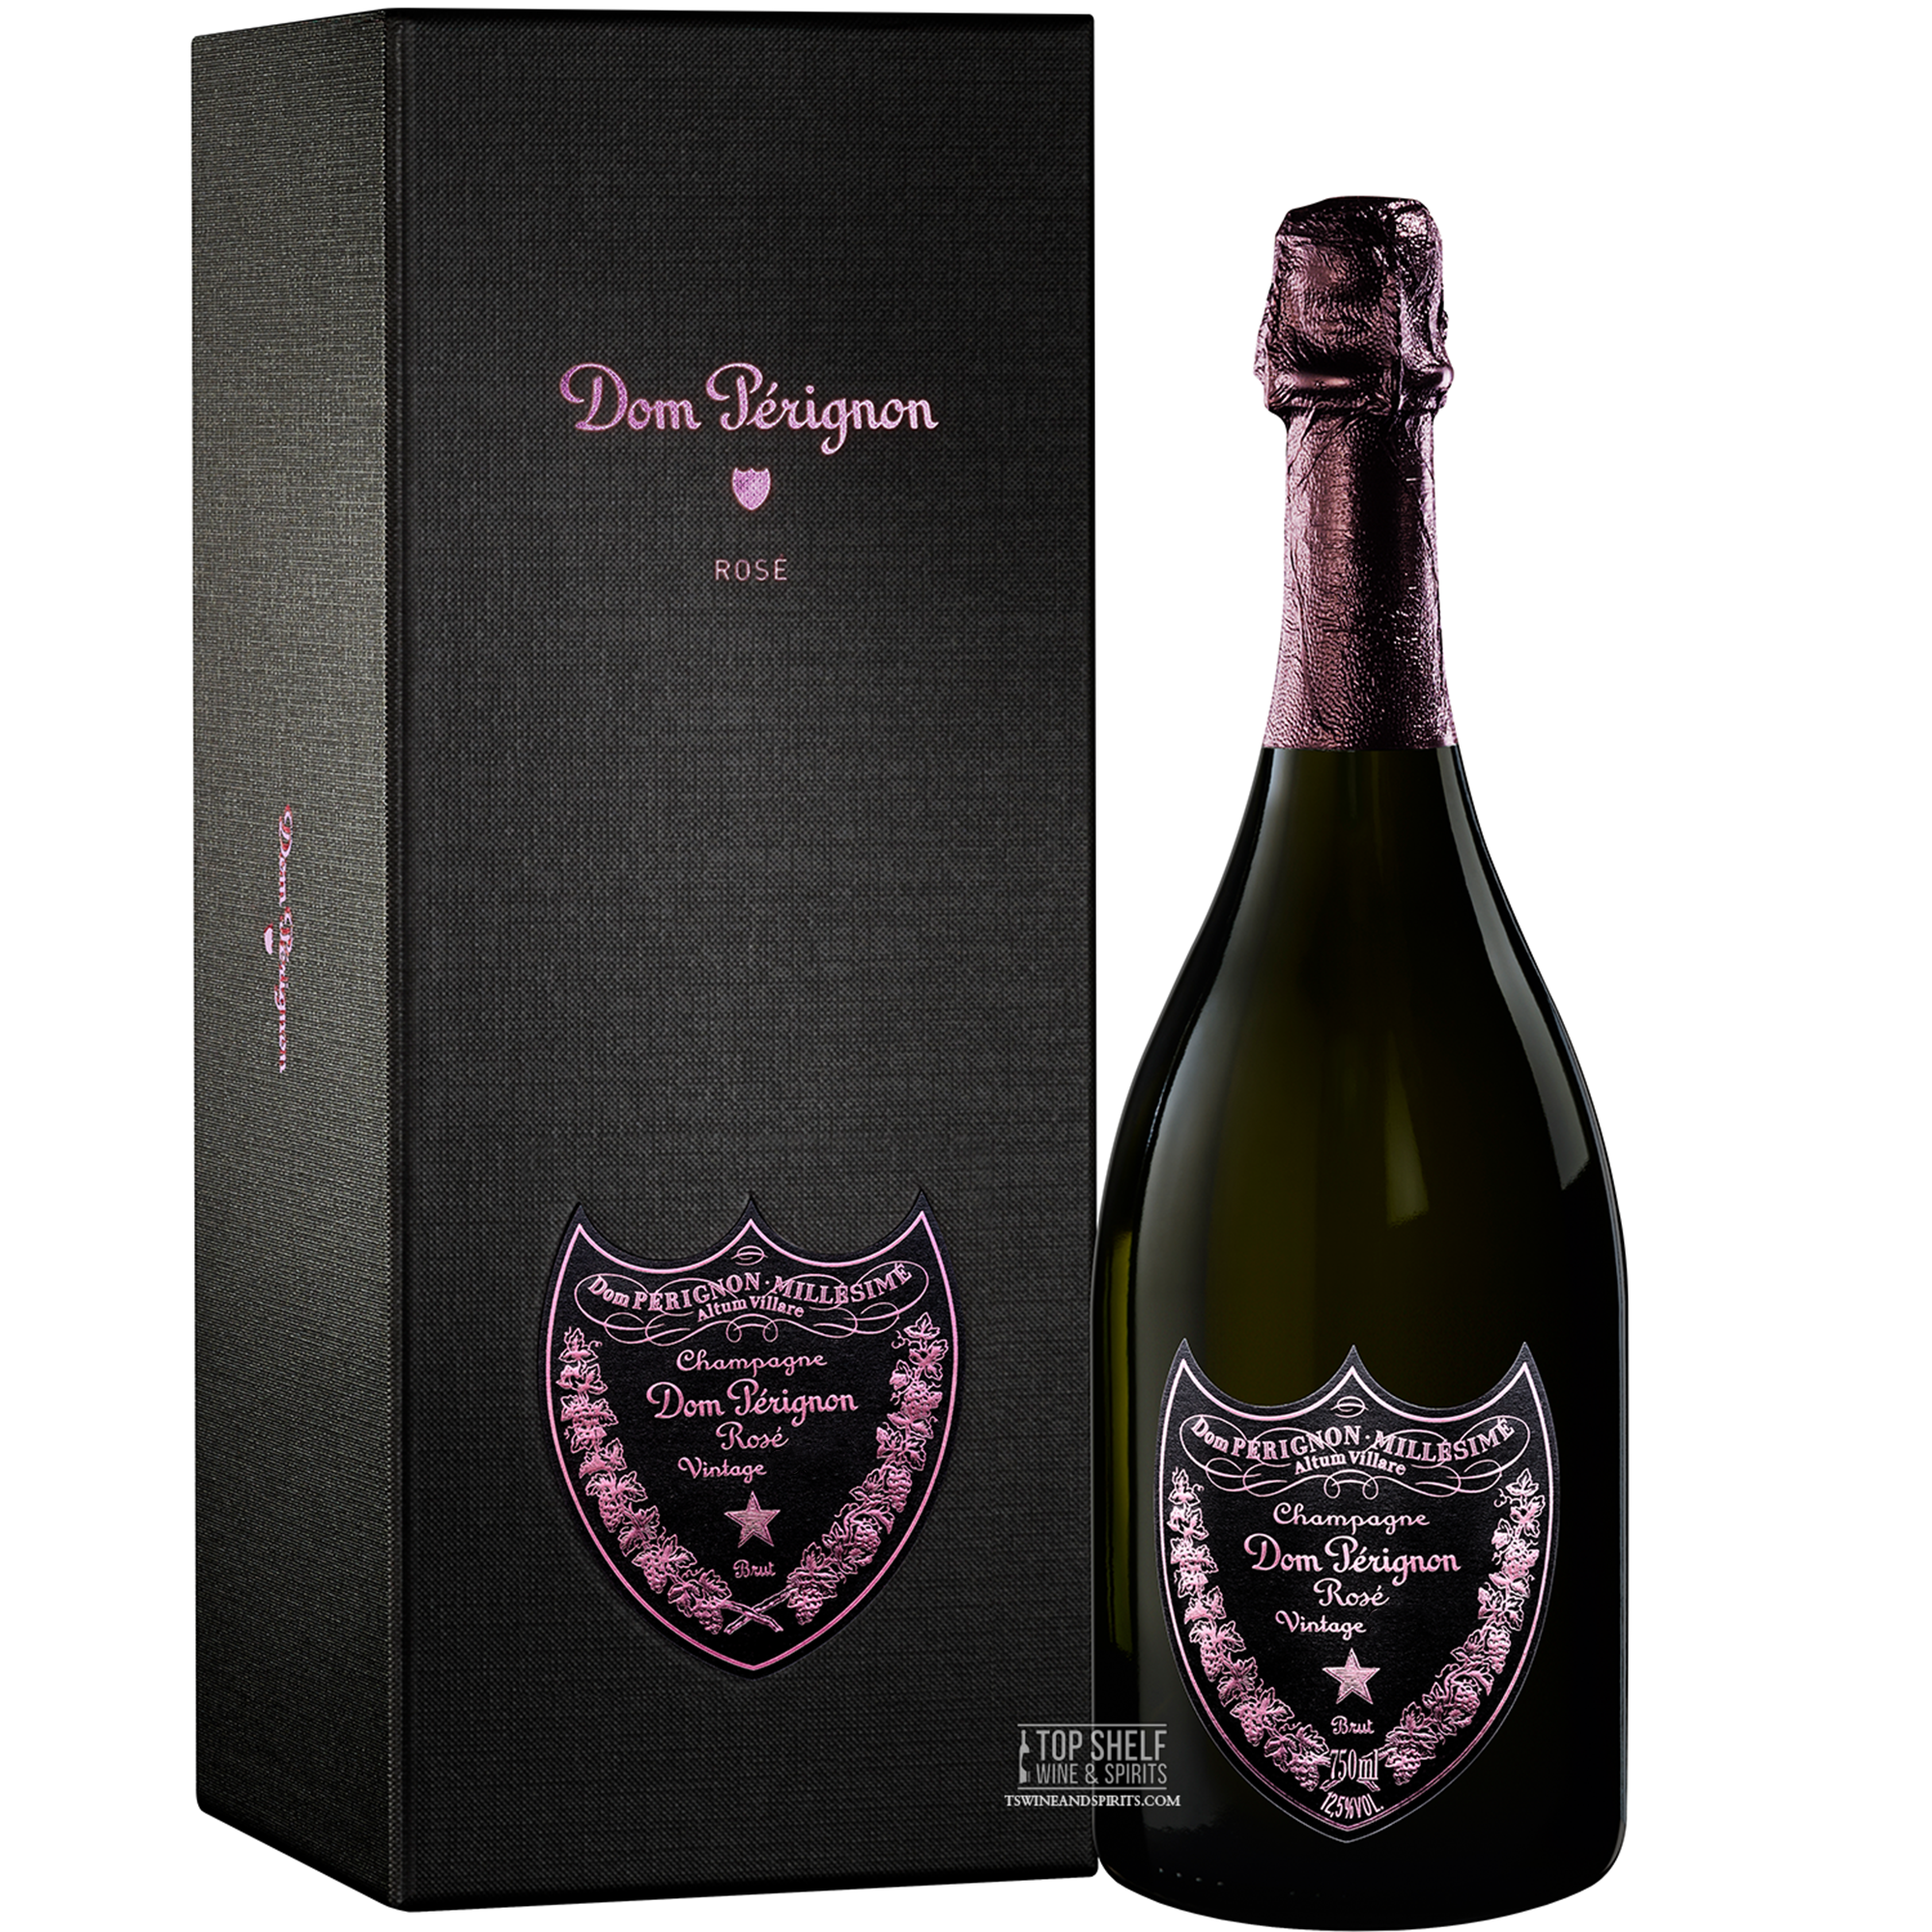 Luc Belaire Champagne - 75cl X 6 Bottles 12.5% Abv